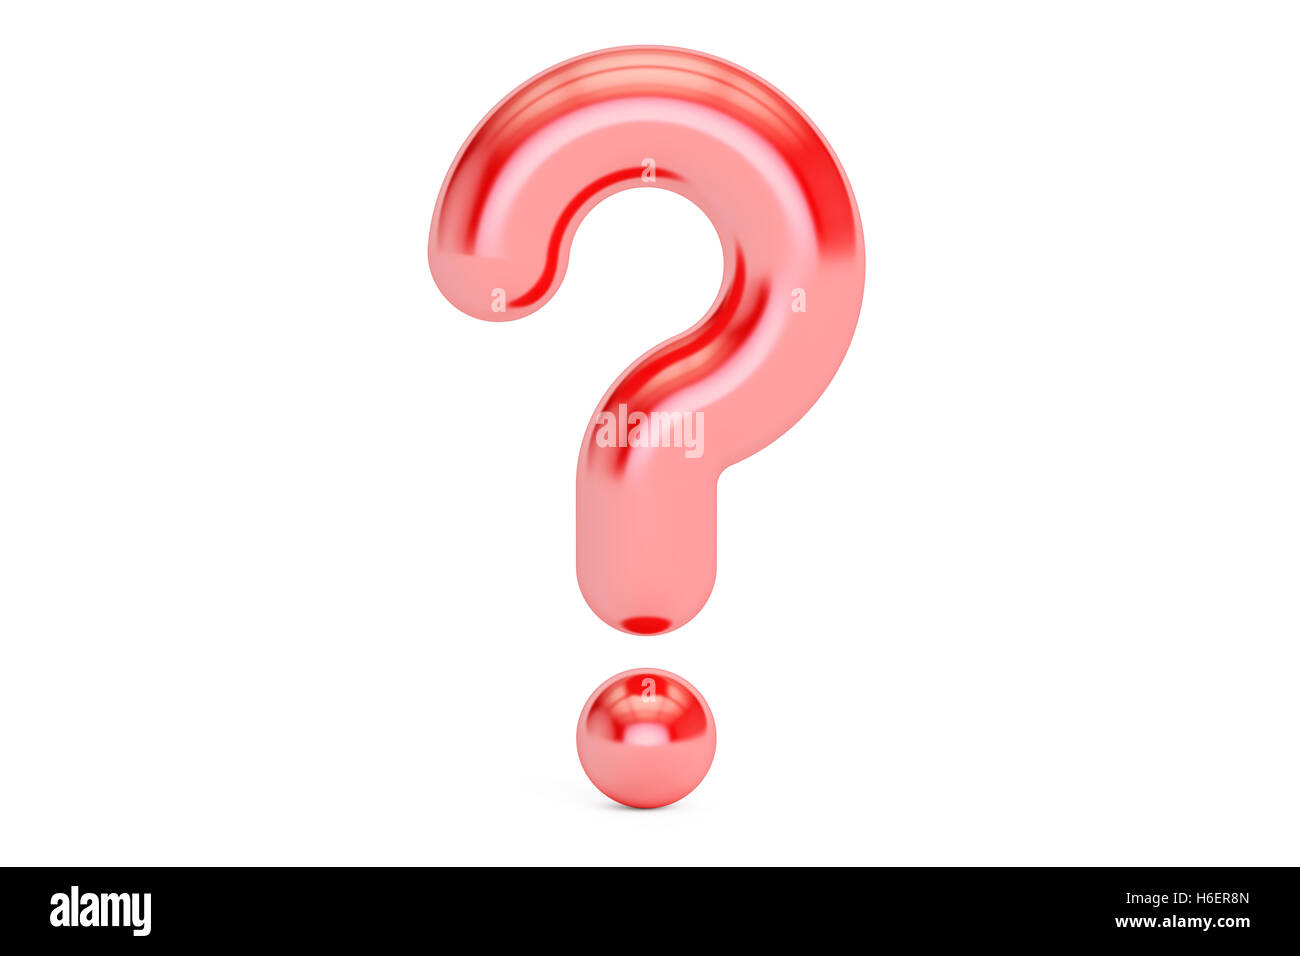 red question mark, 3D rendering isolated on white background Stock Photo